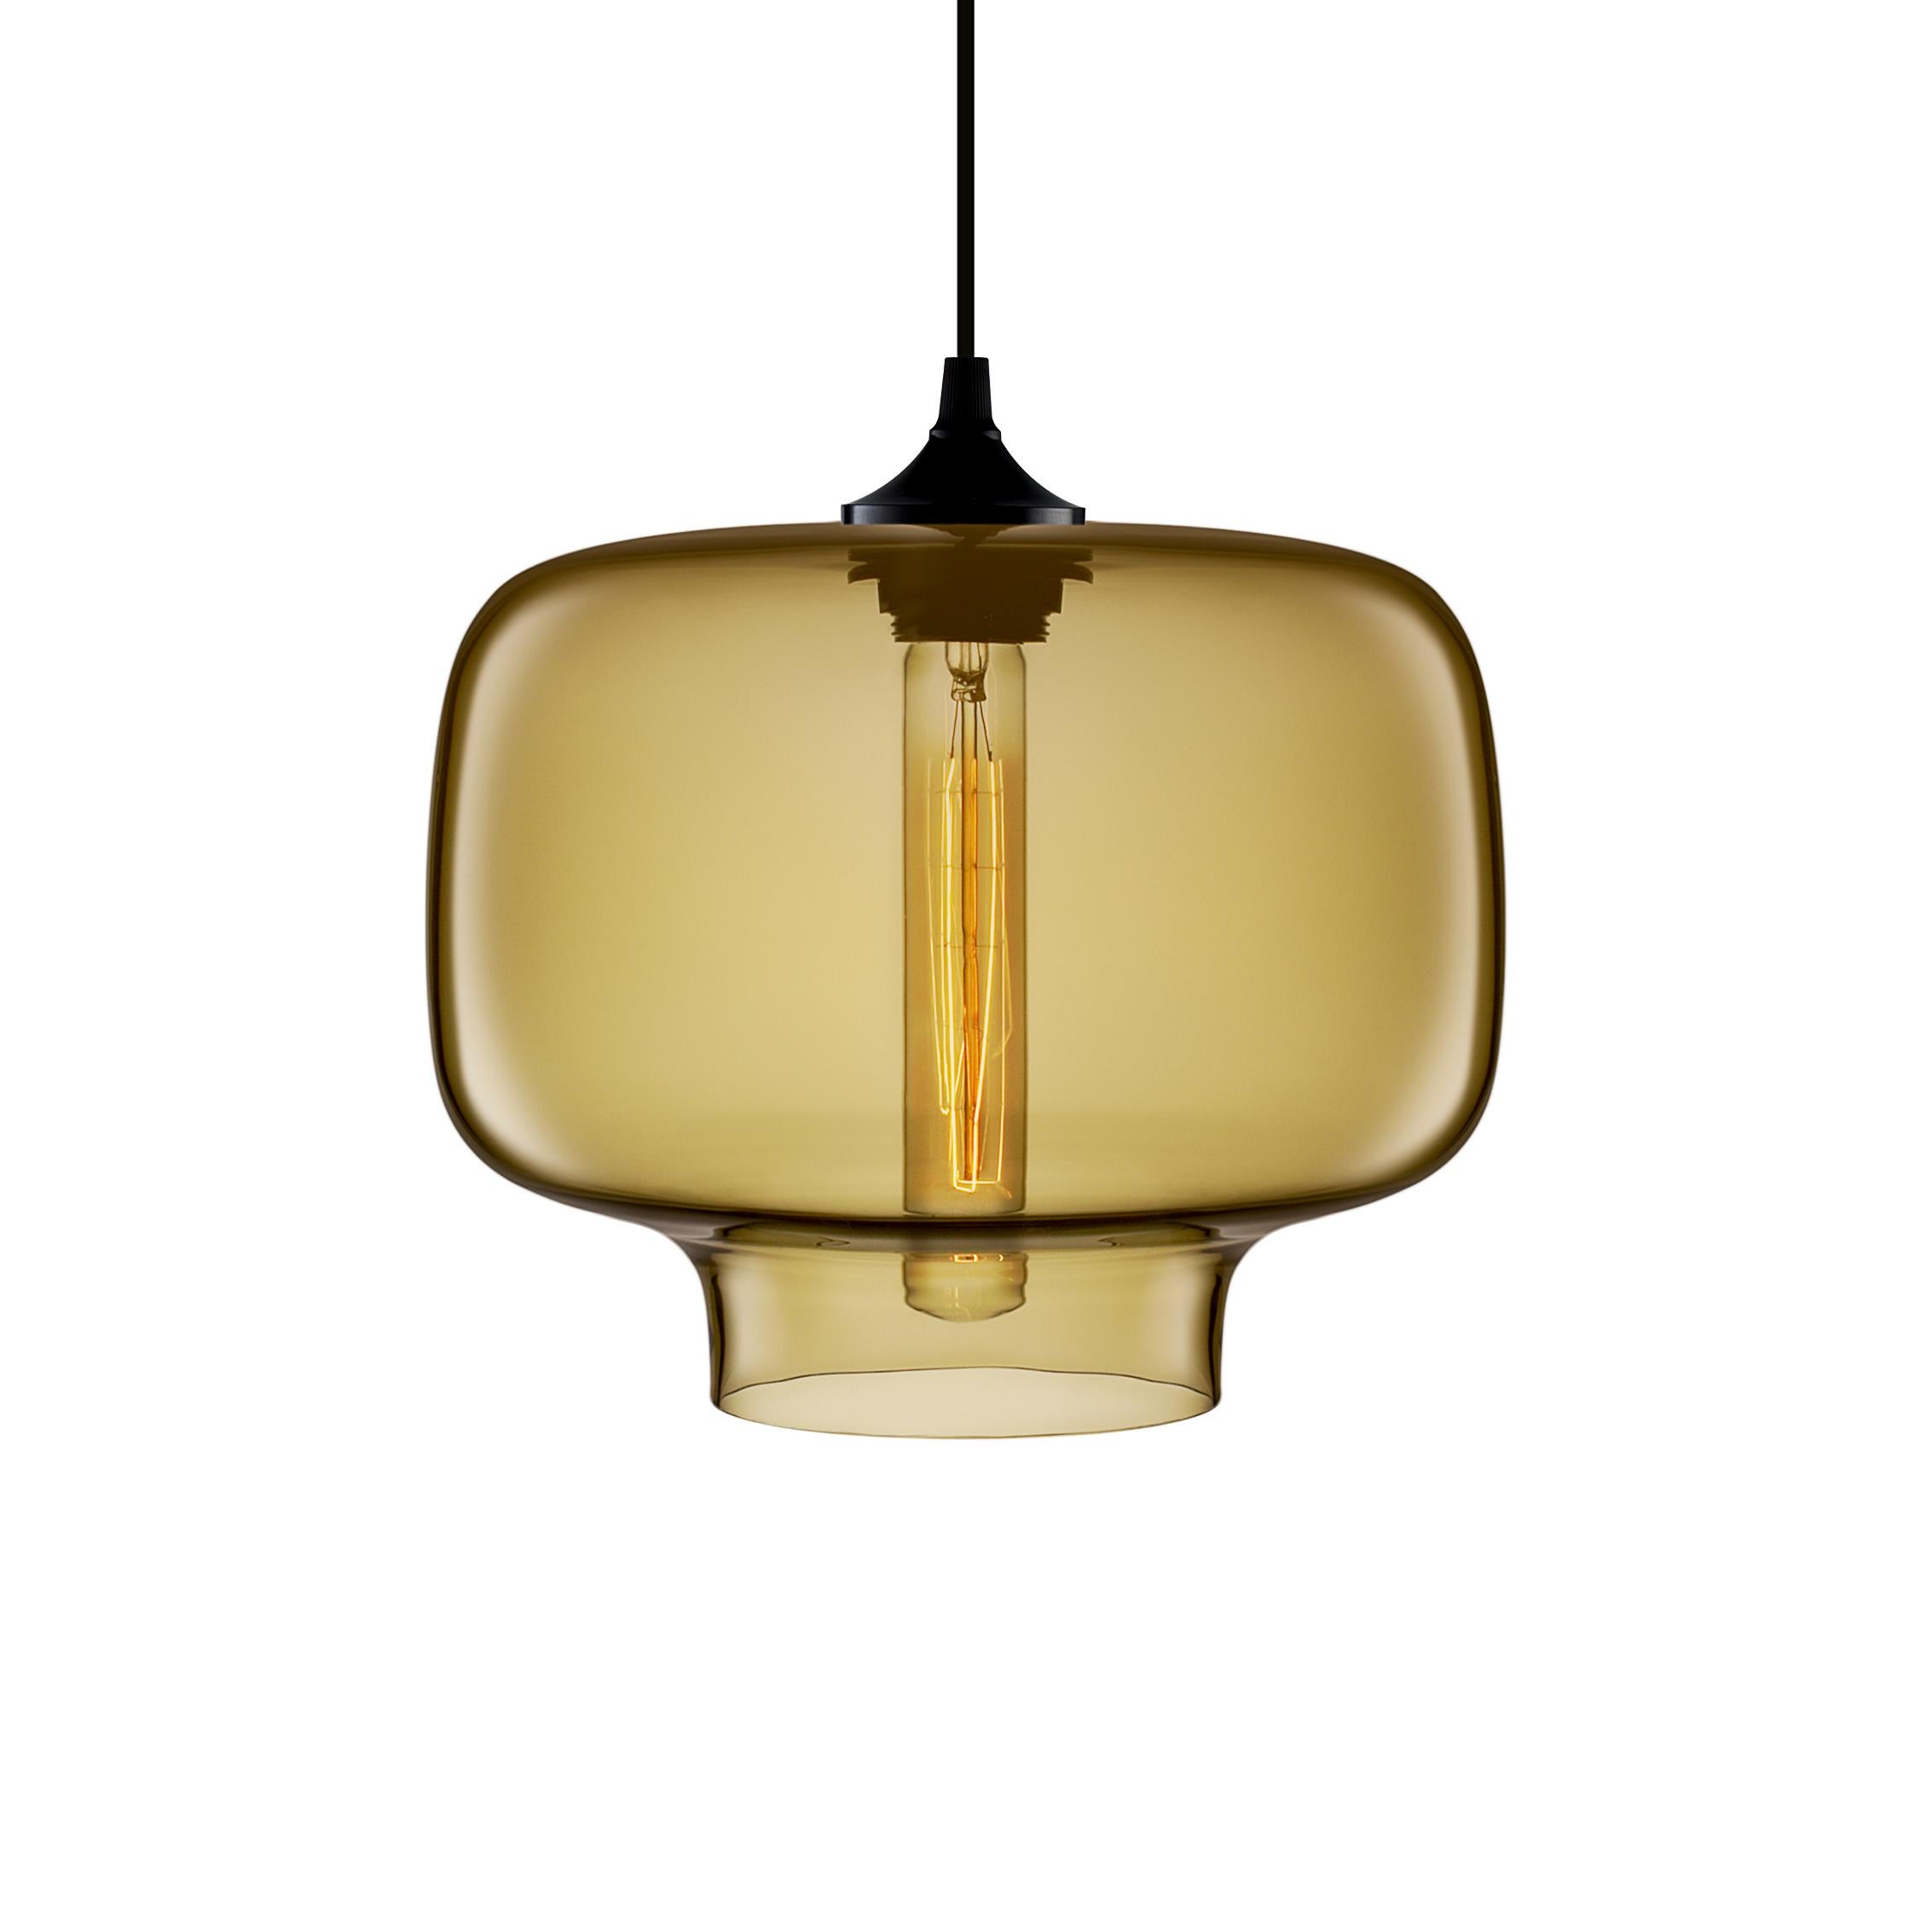 American Oculo Gray Handblown Modern Glass Pendant Light, Made in the USA For Sale